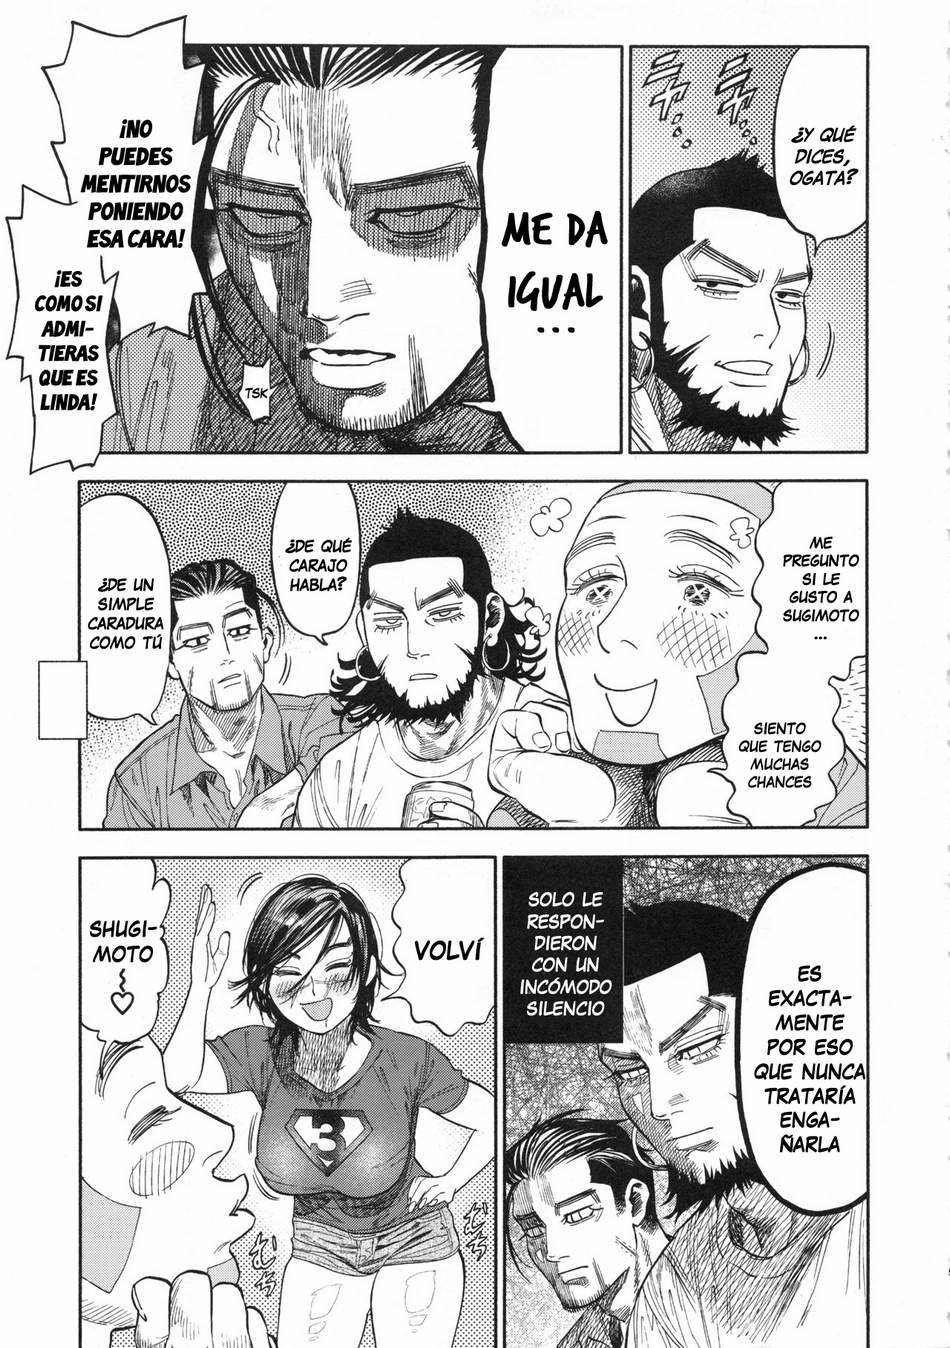 Lets Have Some Sea Otter Meat With Sugimoto-san (Golden Kamuy) - Nishida - 3